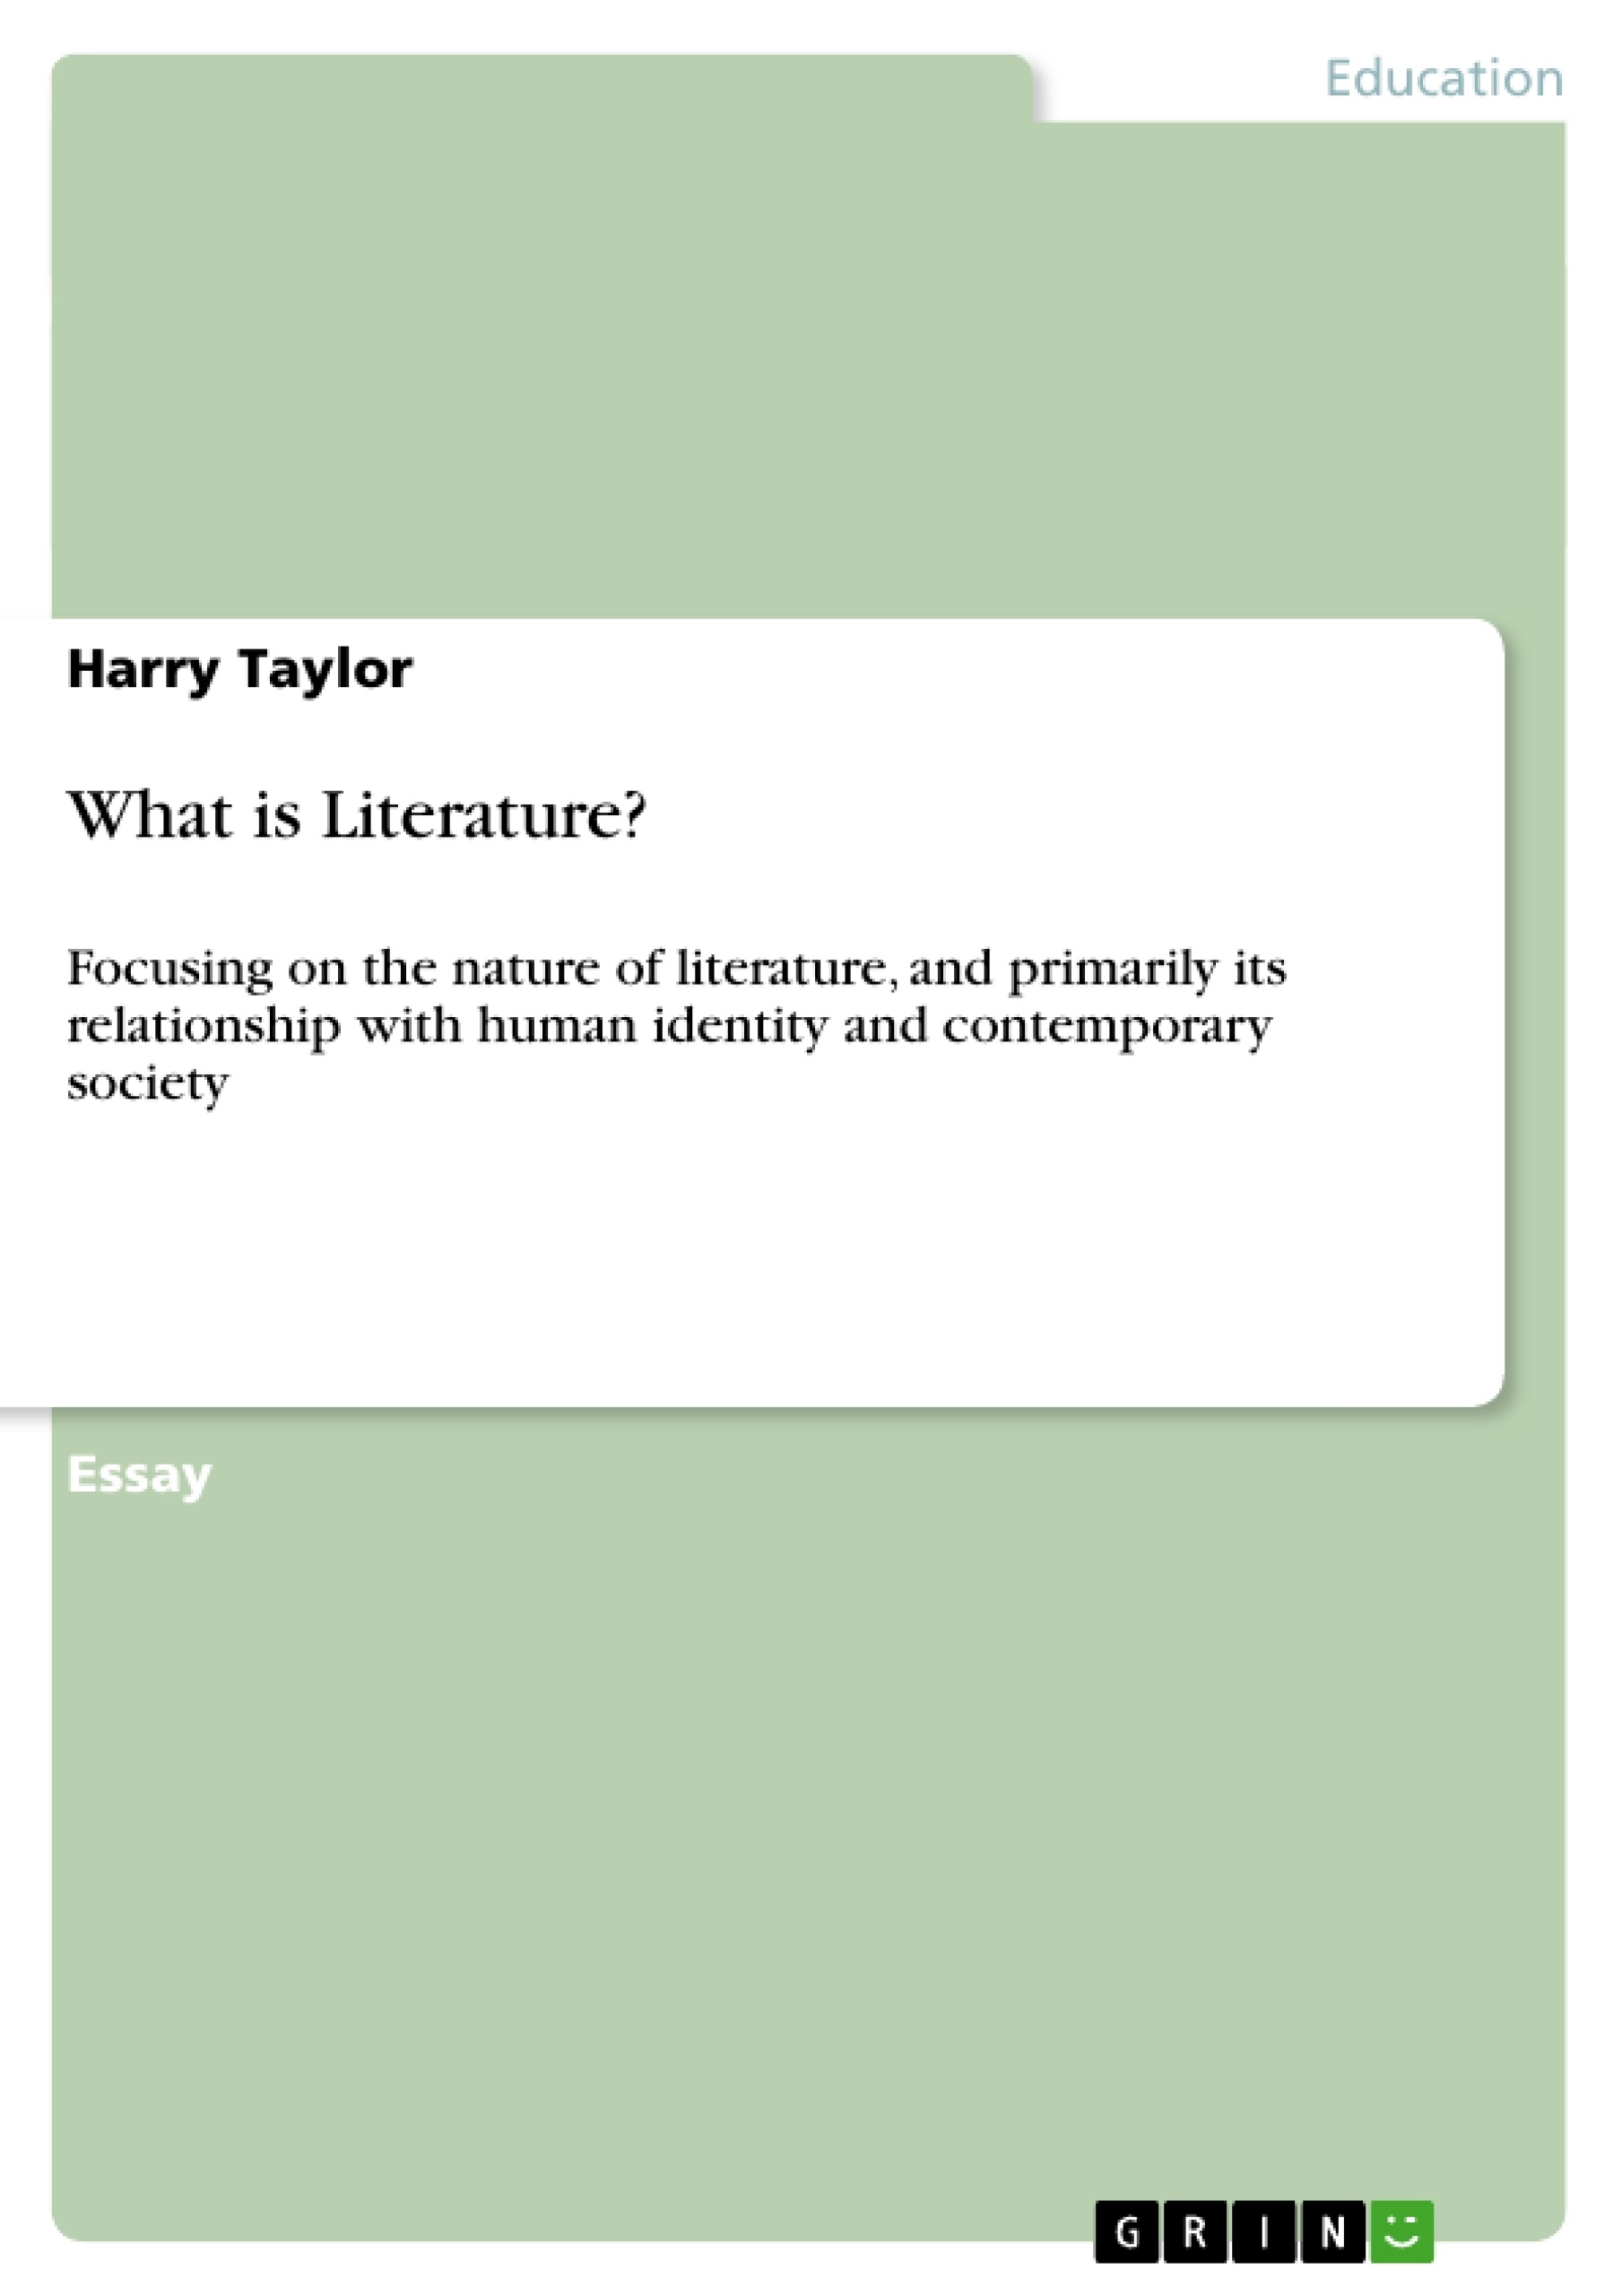 Title: What is Literature?